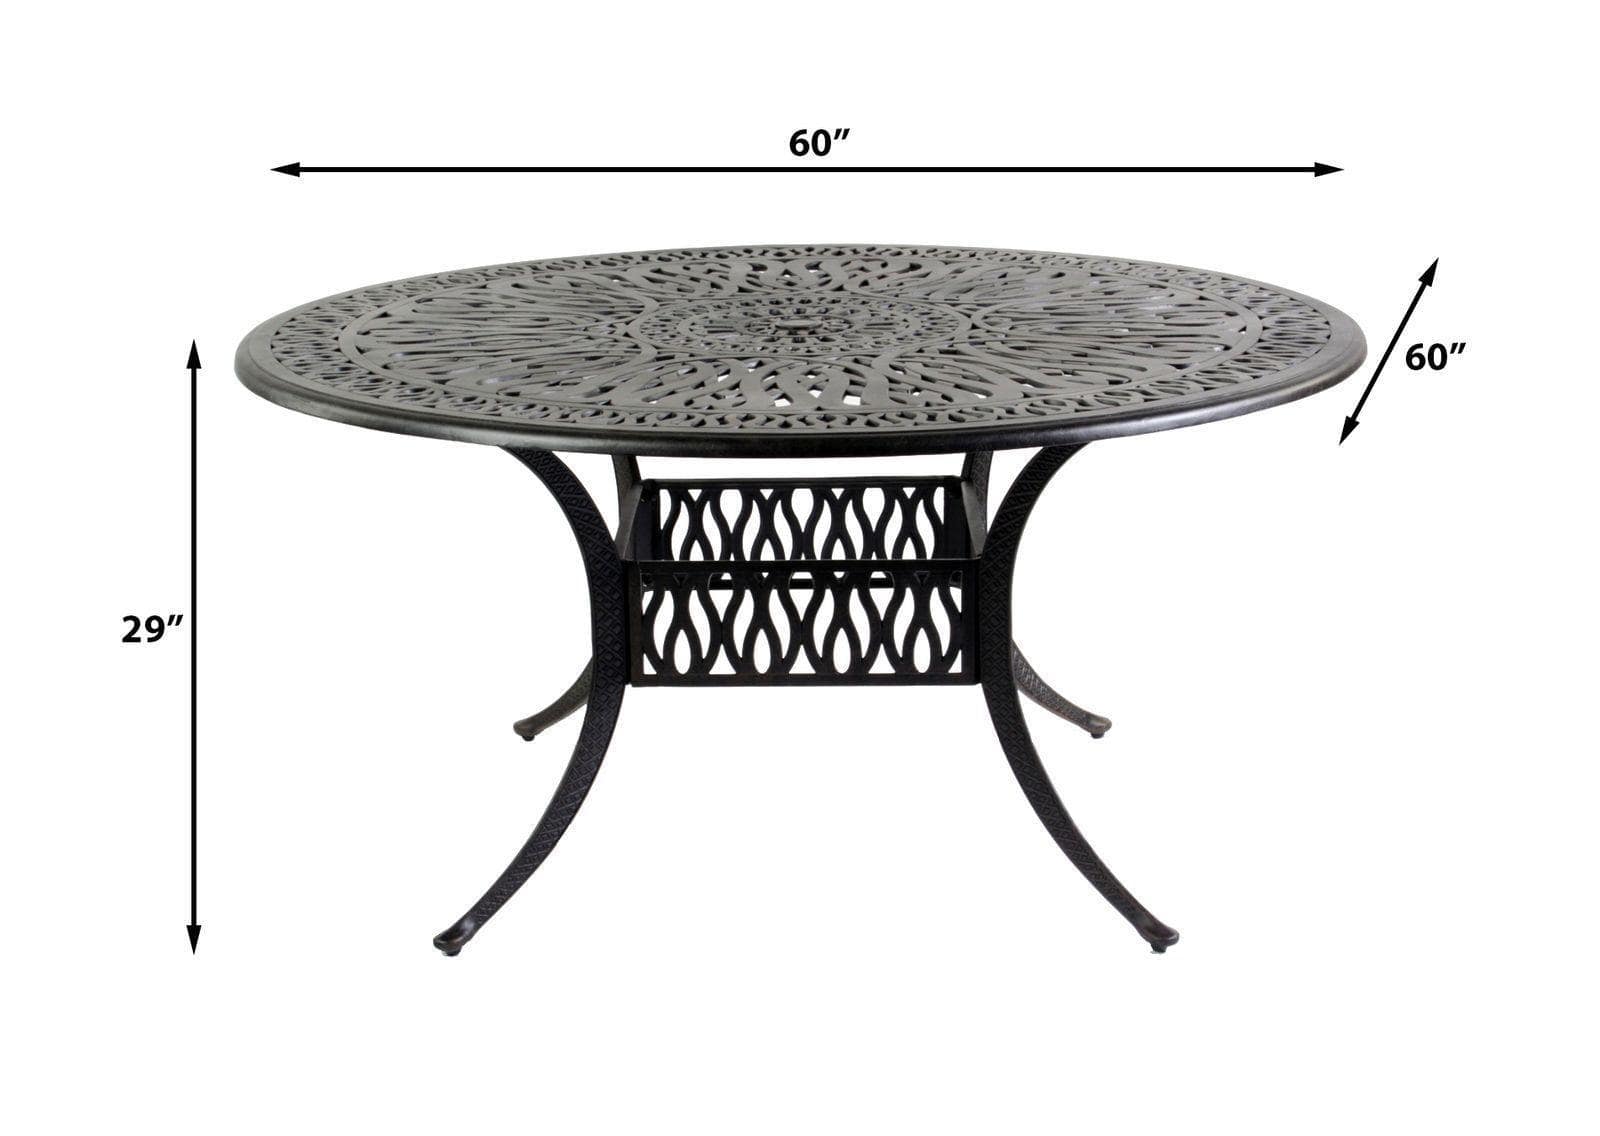 Lawton Casual Comfort Outdoor Dining Table Lawton Casual Comfort - 60" Round Dining Table Signature